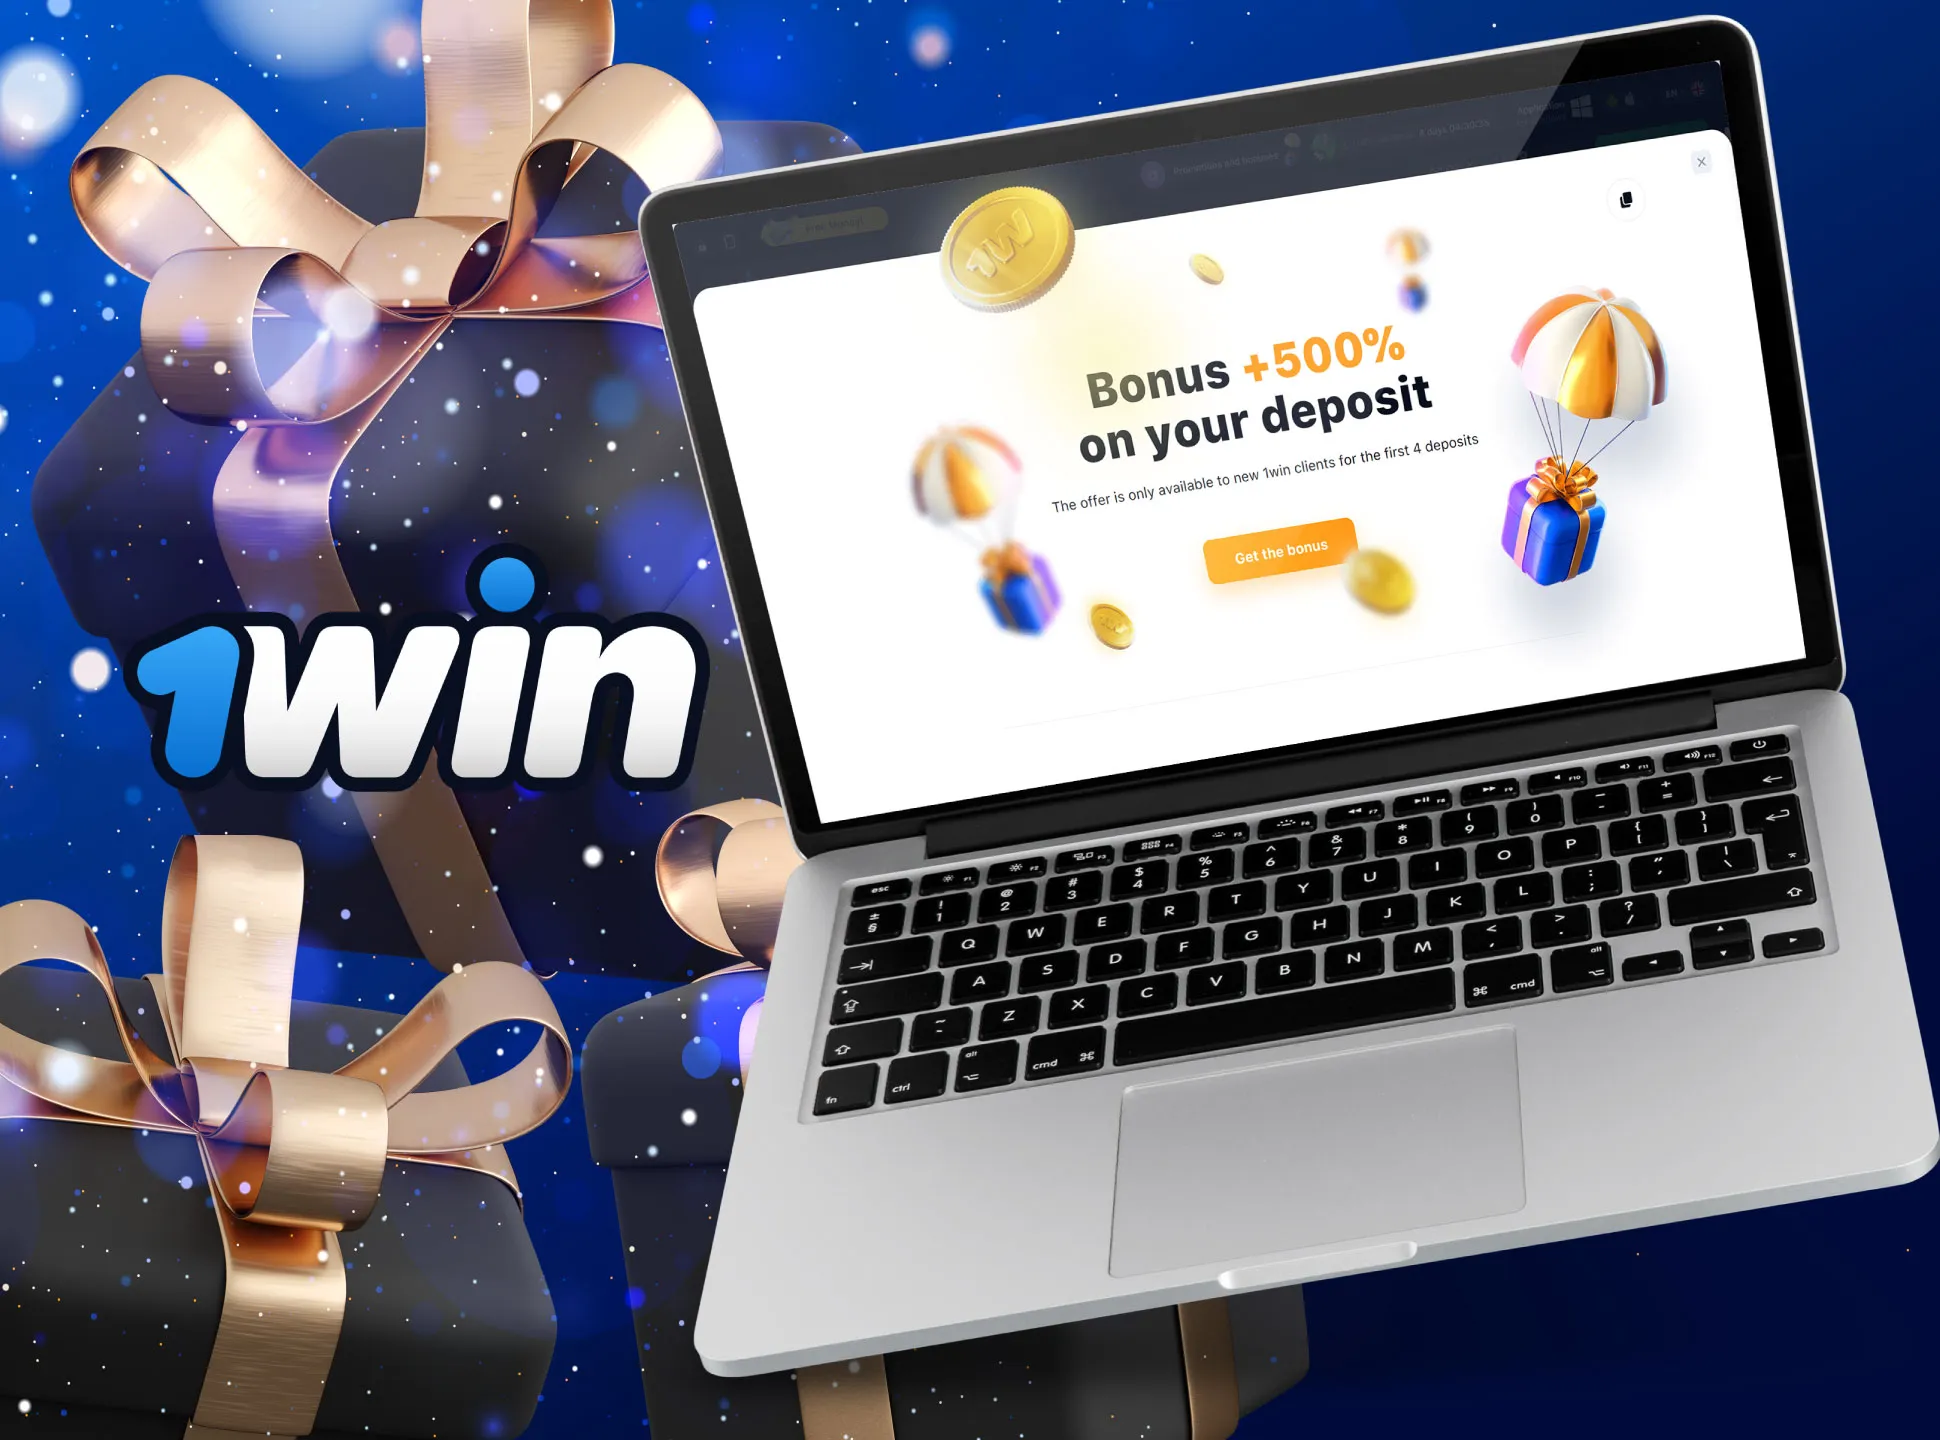 Don't forget to claim a welcome bonus of 1win during the registration.